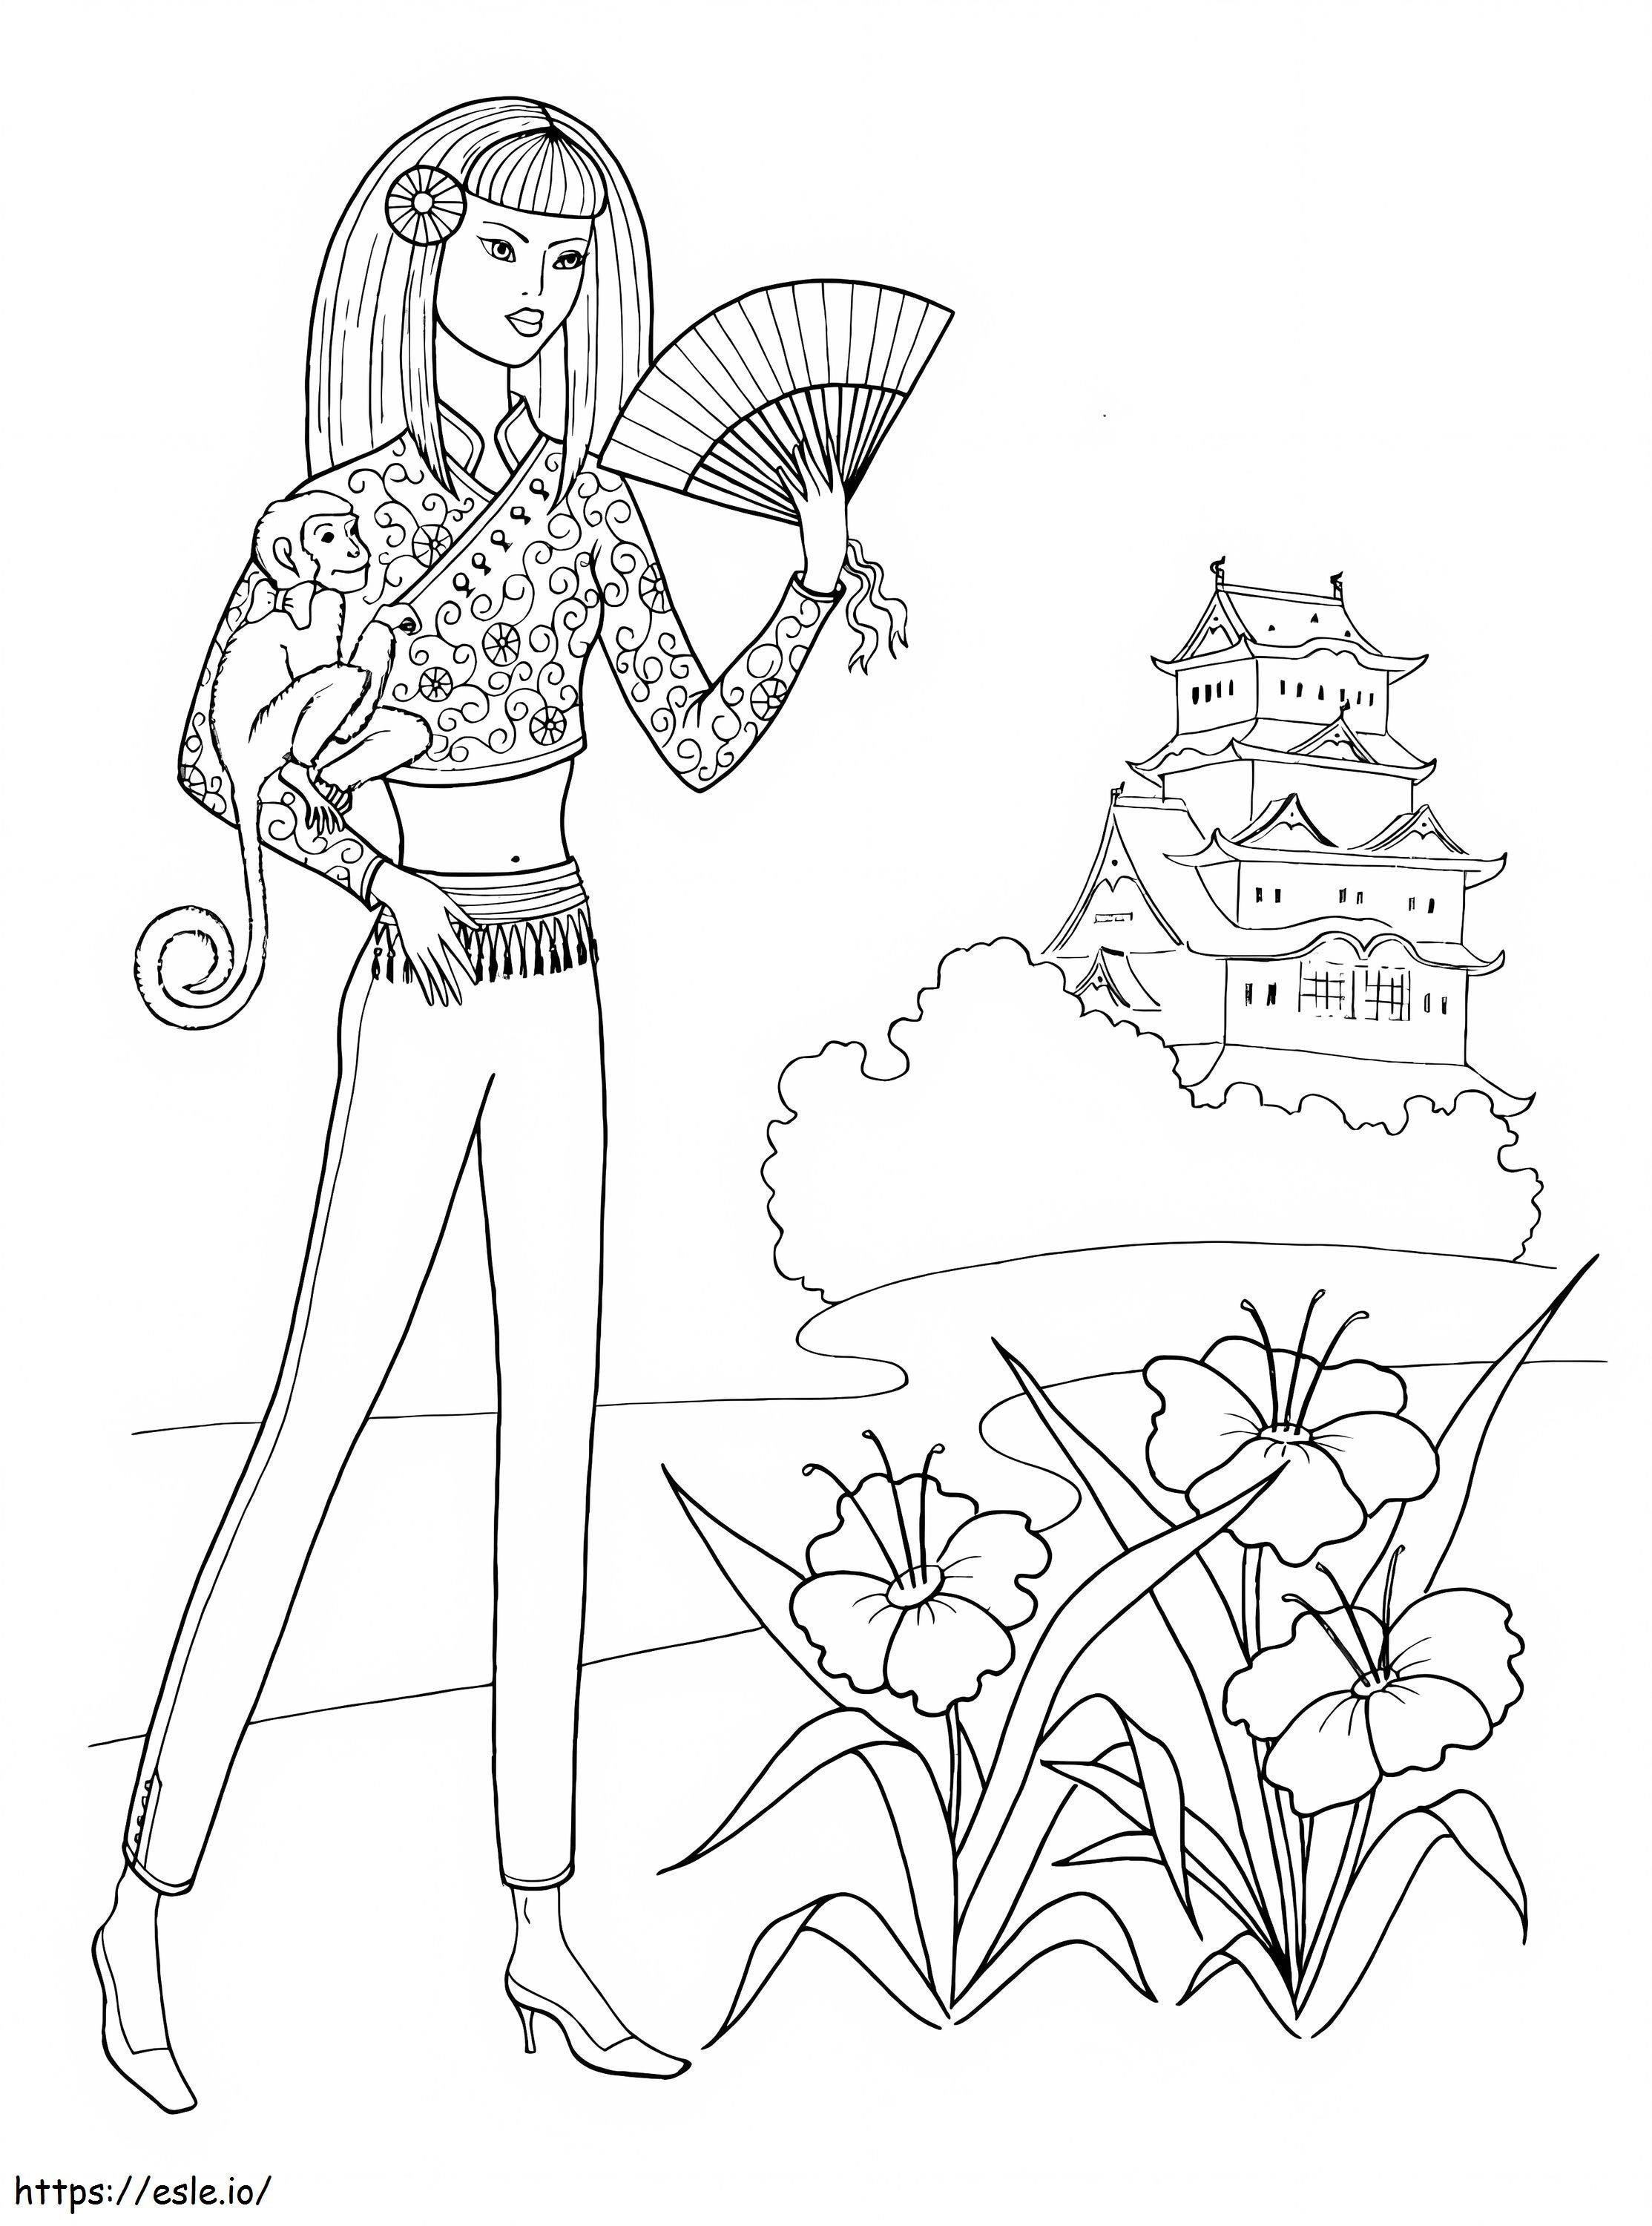 Chinese Teenage Girl coloring page